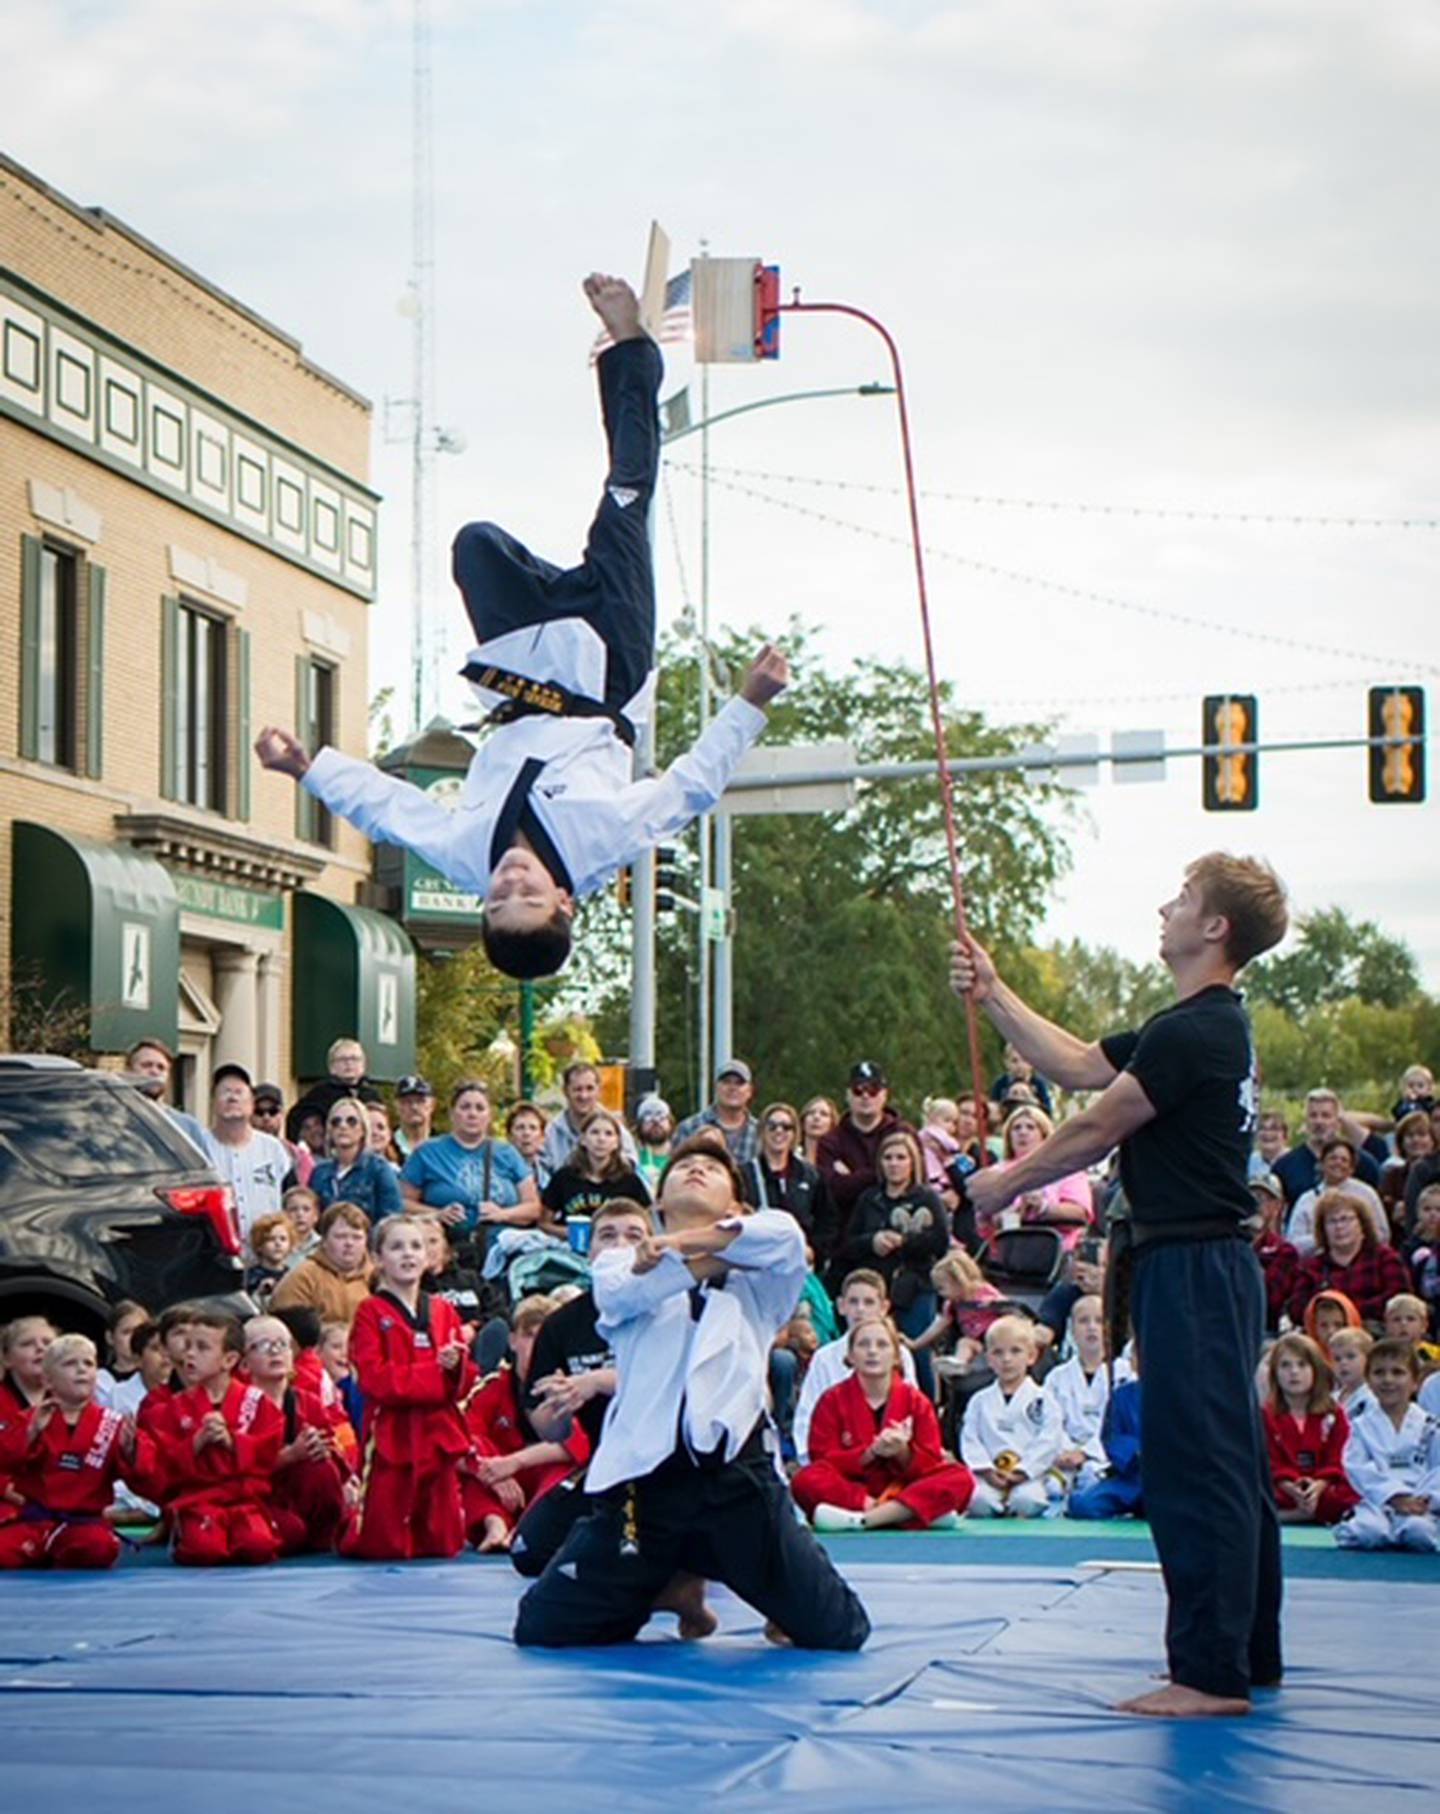 Michael Bolis flips in the air as part of a performance with Lee Family Martial Arts